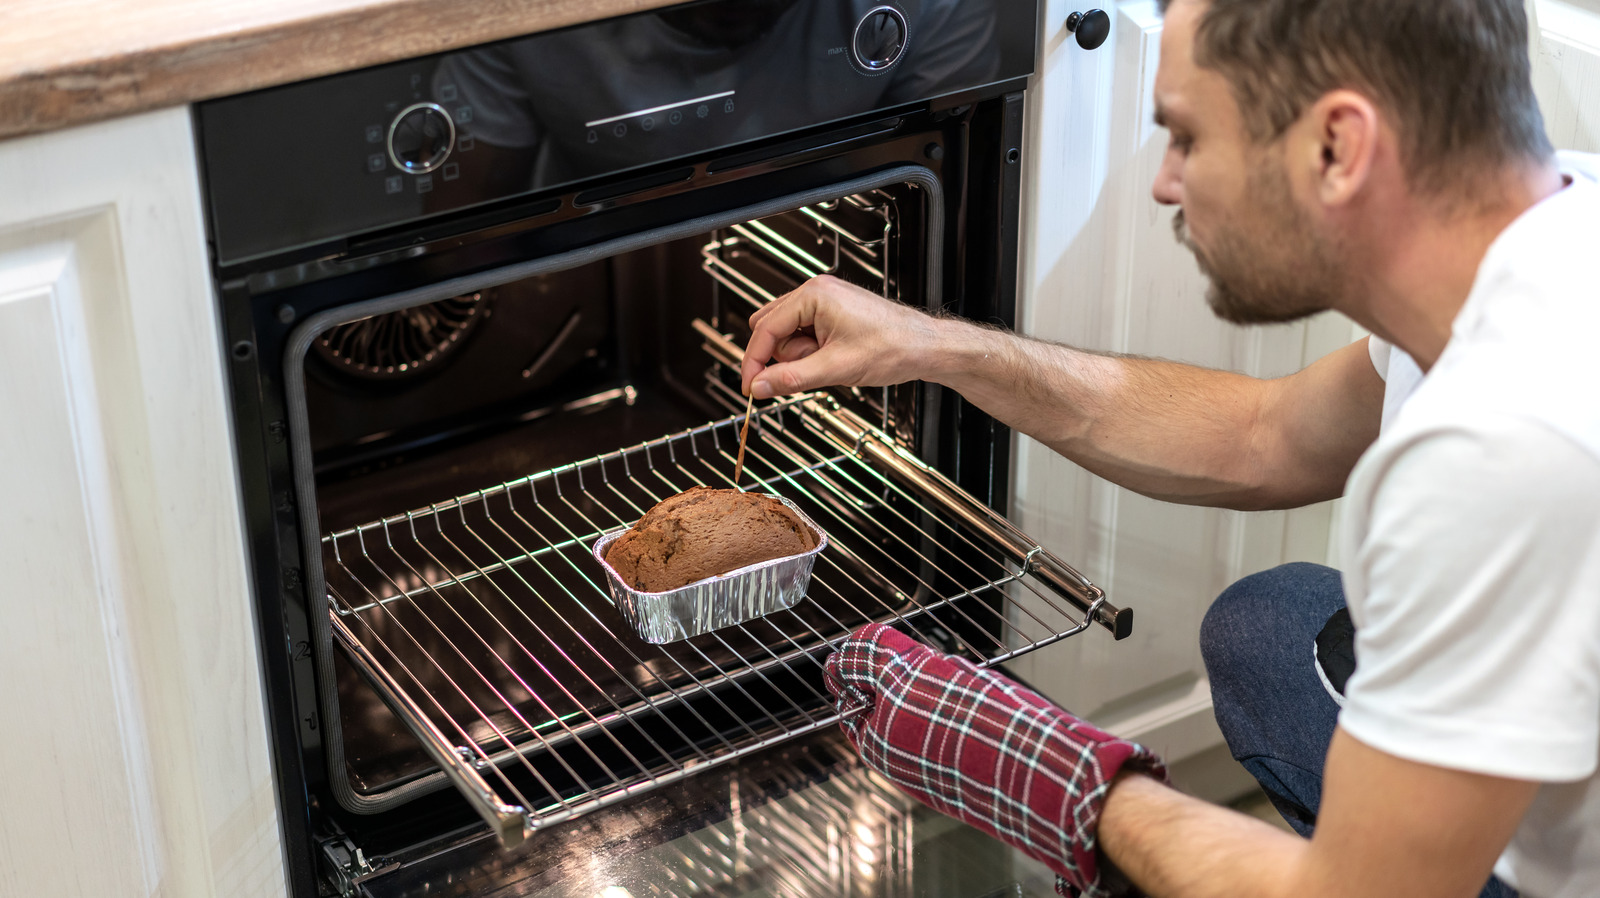 What is a Convection Oven?